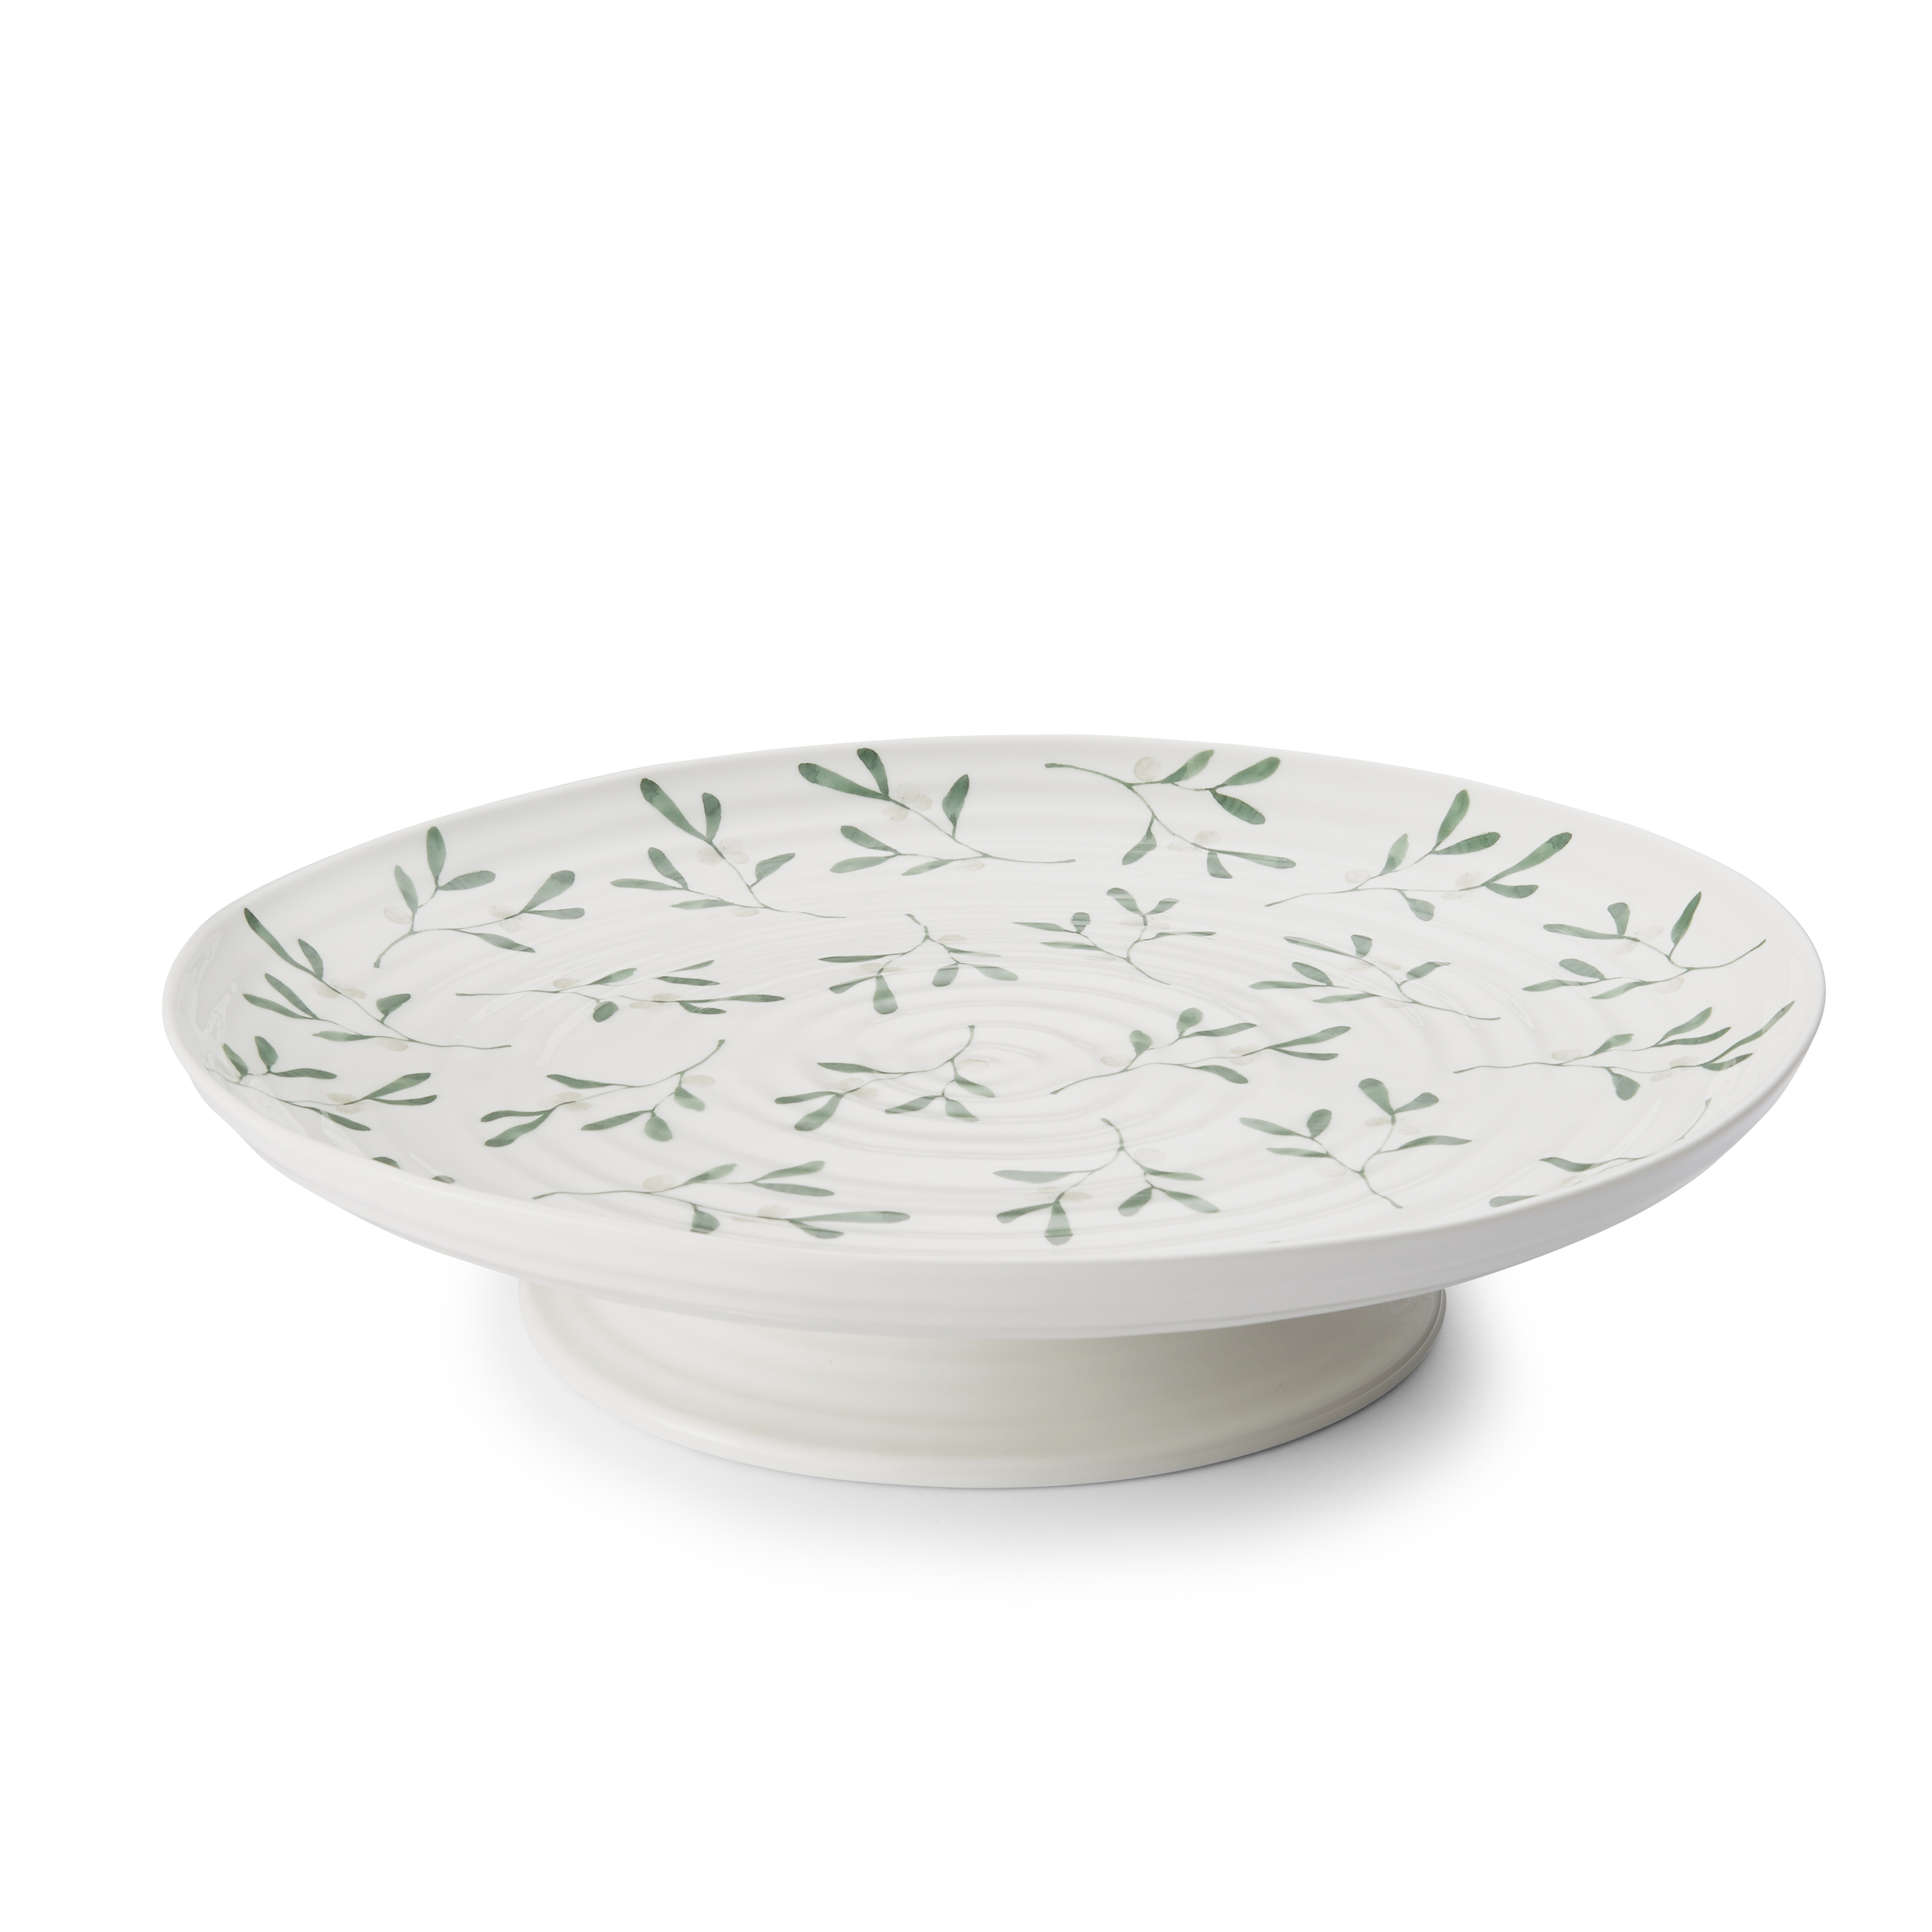 Sophie Conran Mistletoe Footed Cake Plate image number null